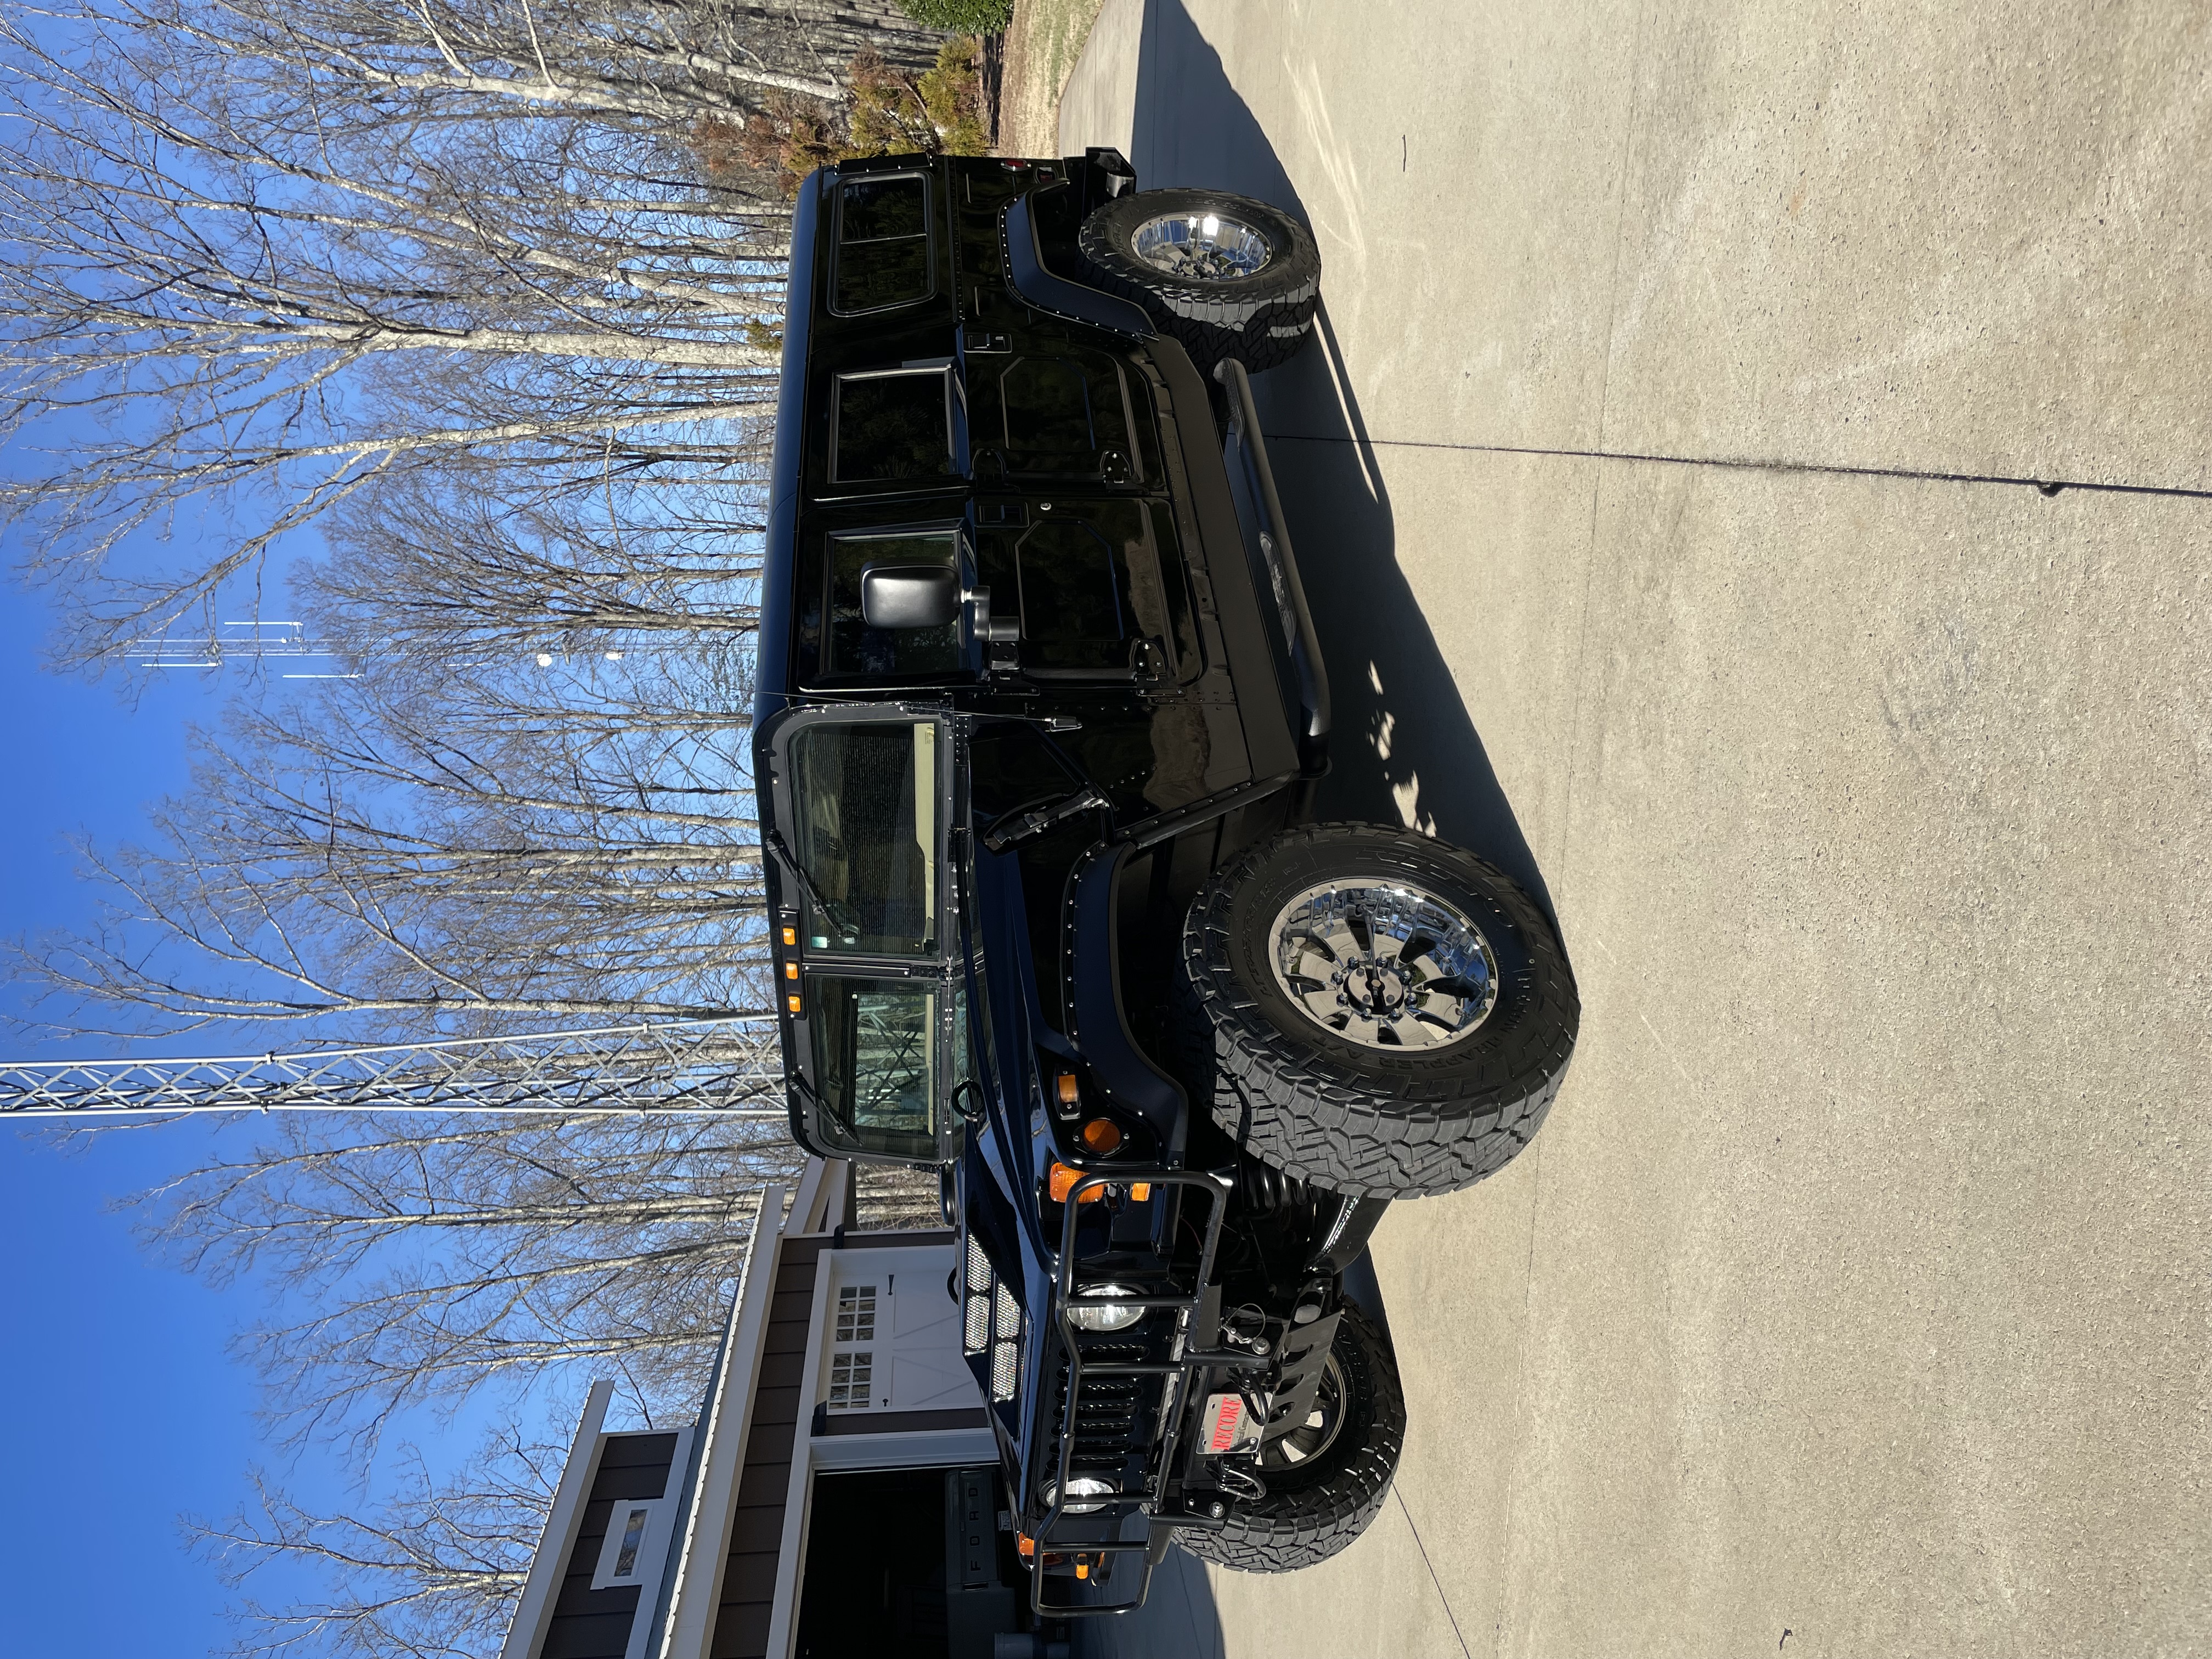 hummer h1 lifted black